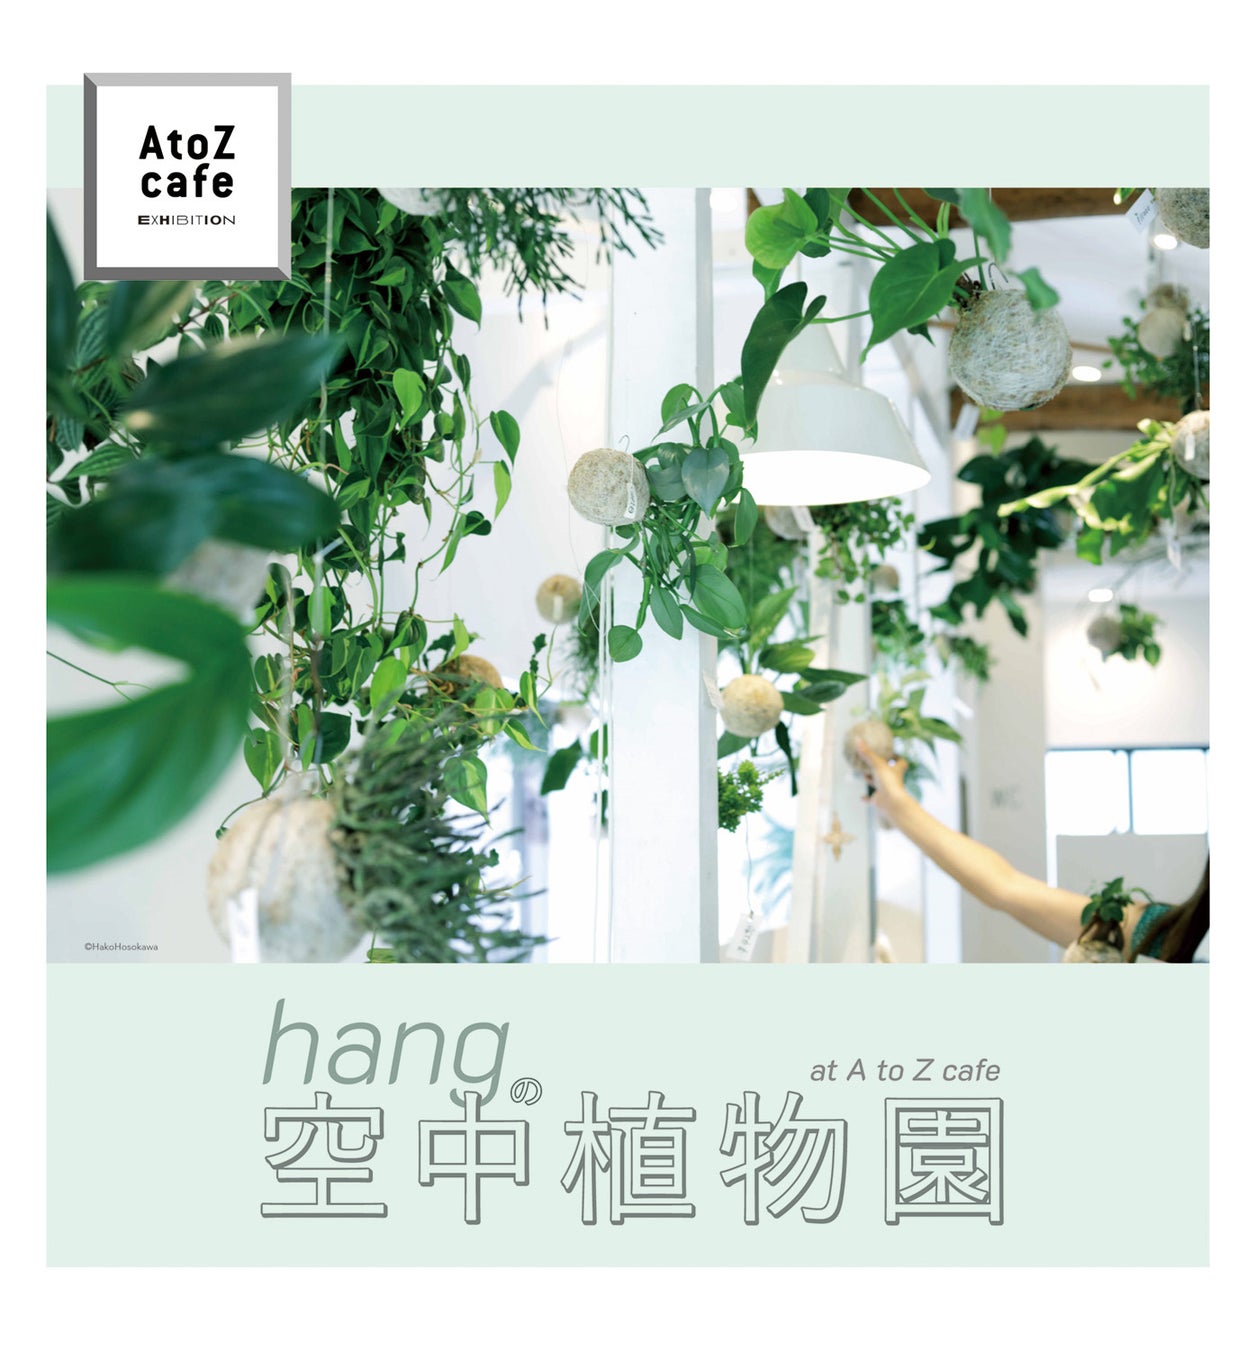 「hangの空中植物園」ワークショップ南青山「A to Z cafe」で2日間限定開催！